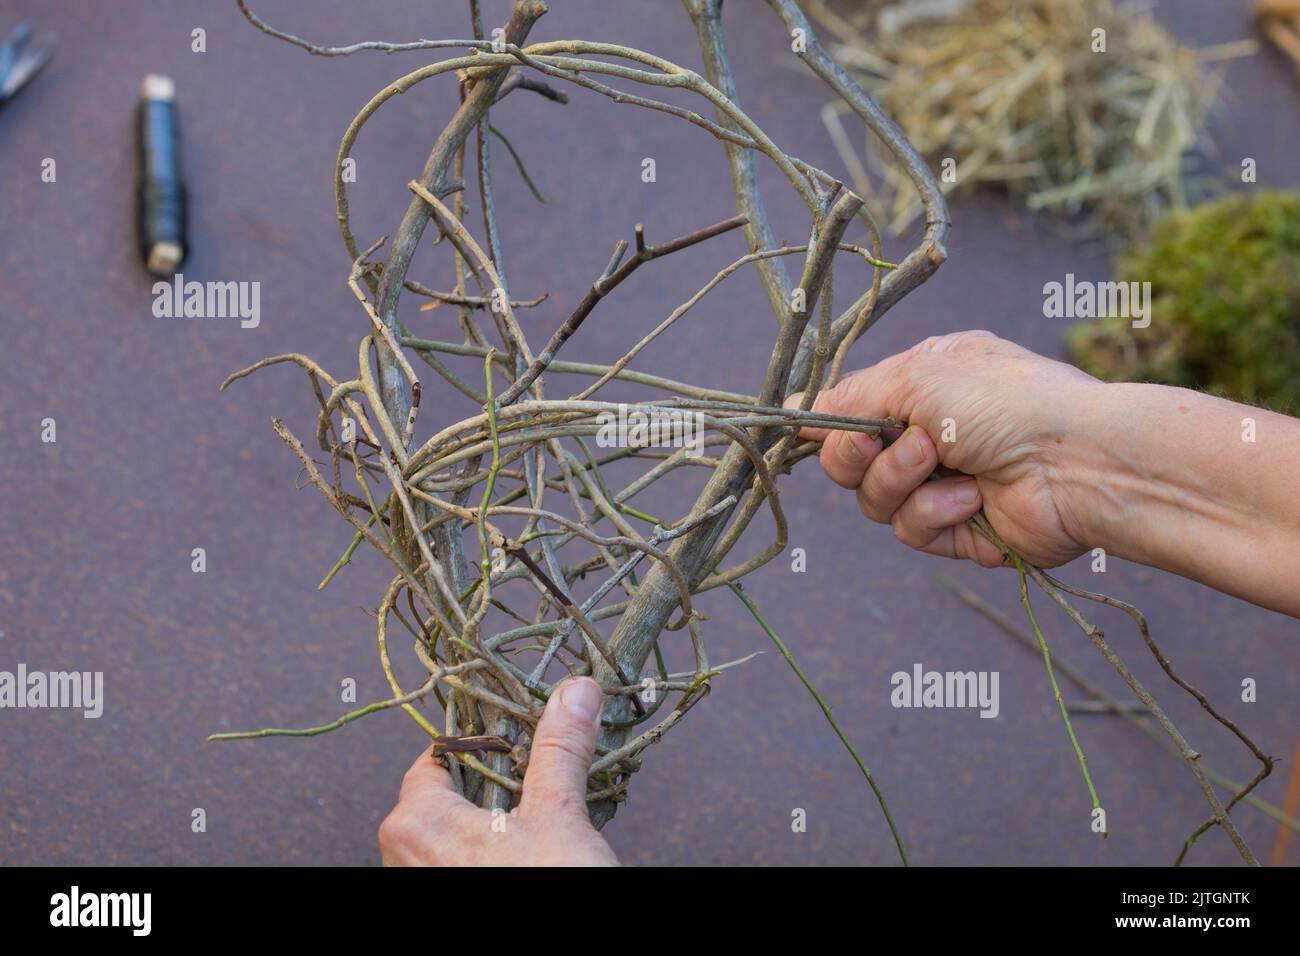 nesting material for birds in the garden. Step 3/4: Wrap with vines - Fix a vine at the bottom with florist's wire and wrap it around your branch Stock Photo